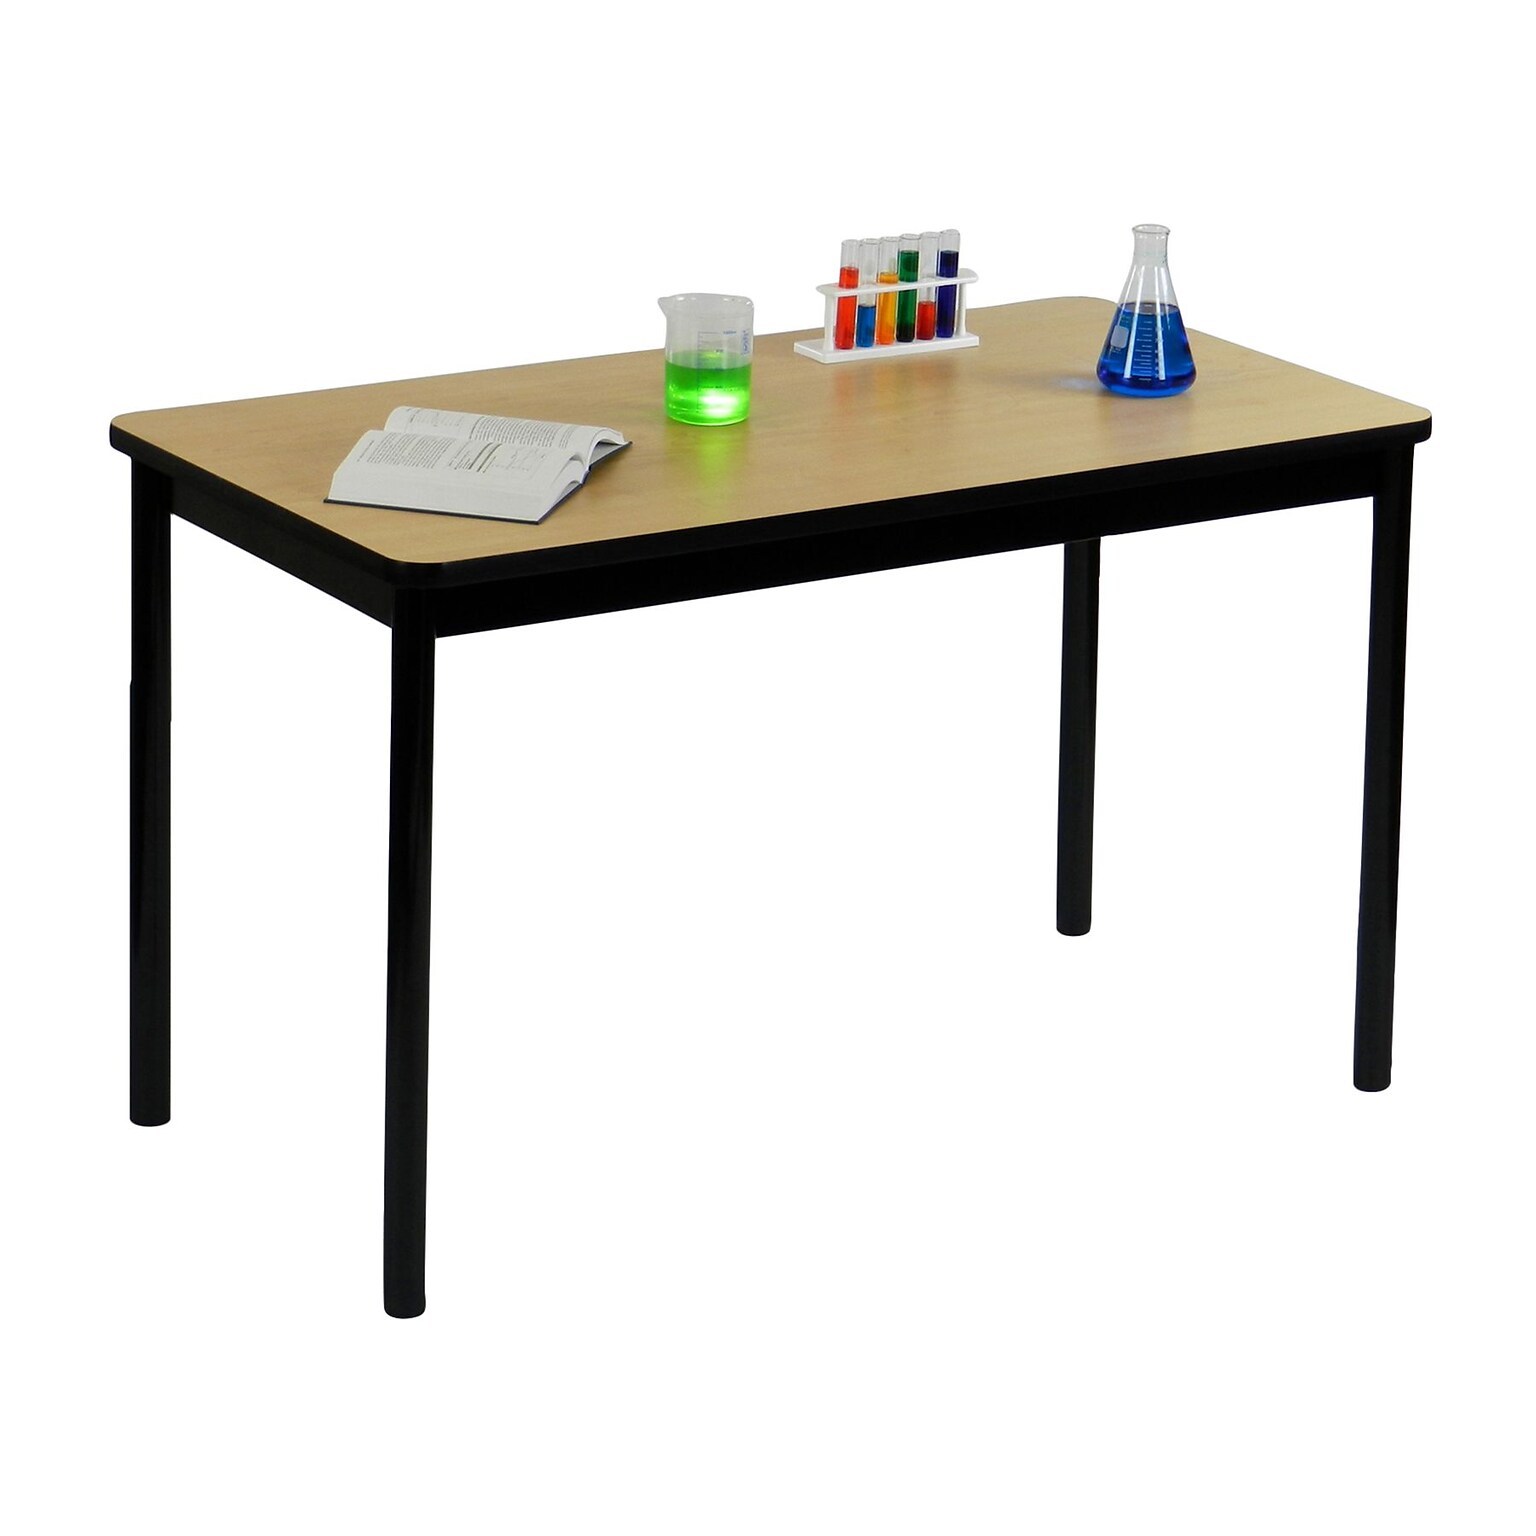 Correll, Inc. 60 Rectangular Shape High-Pressure Laminate Top Lab Table, Fusion Maple with Black Frame (LT3060)